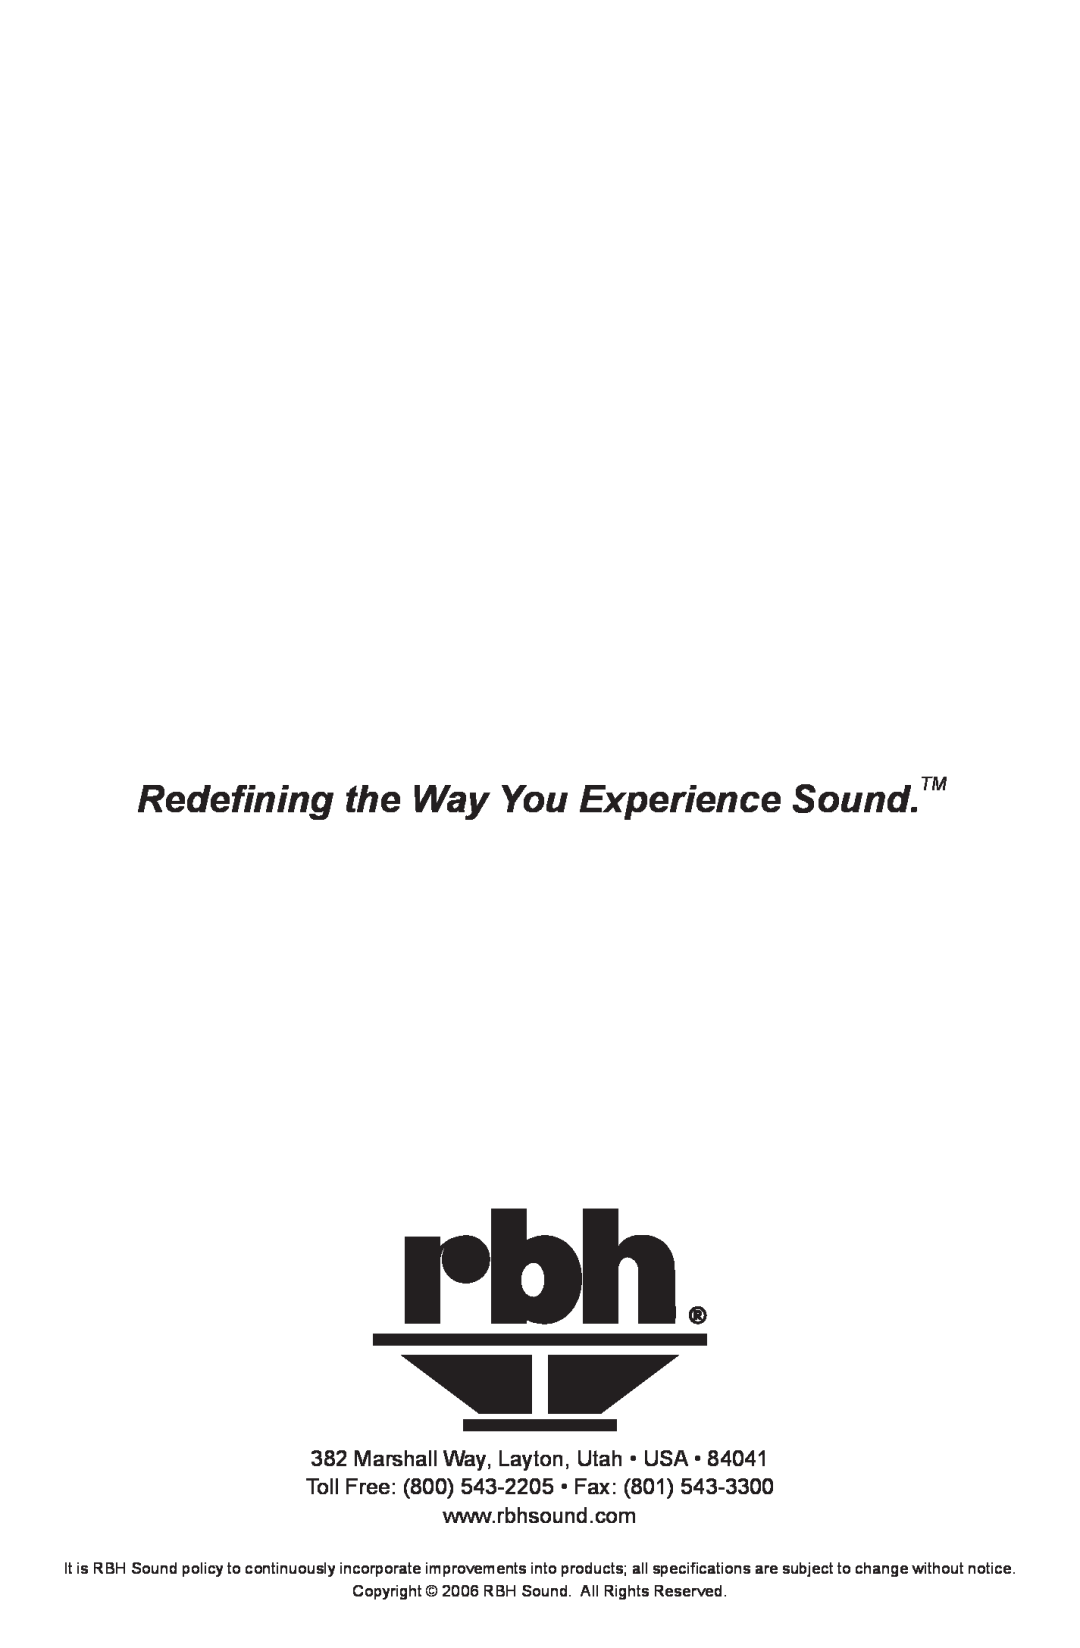 RBH Sound PC-10 SUBWOOFER Redefining the Way You Experience Sound.TM, Copyright 2006 RBH Sound. All Rights Reserved 